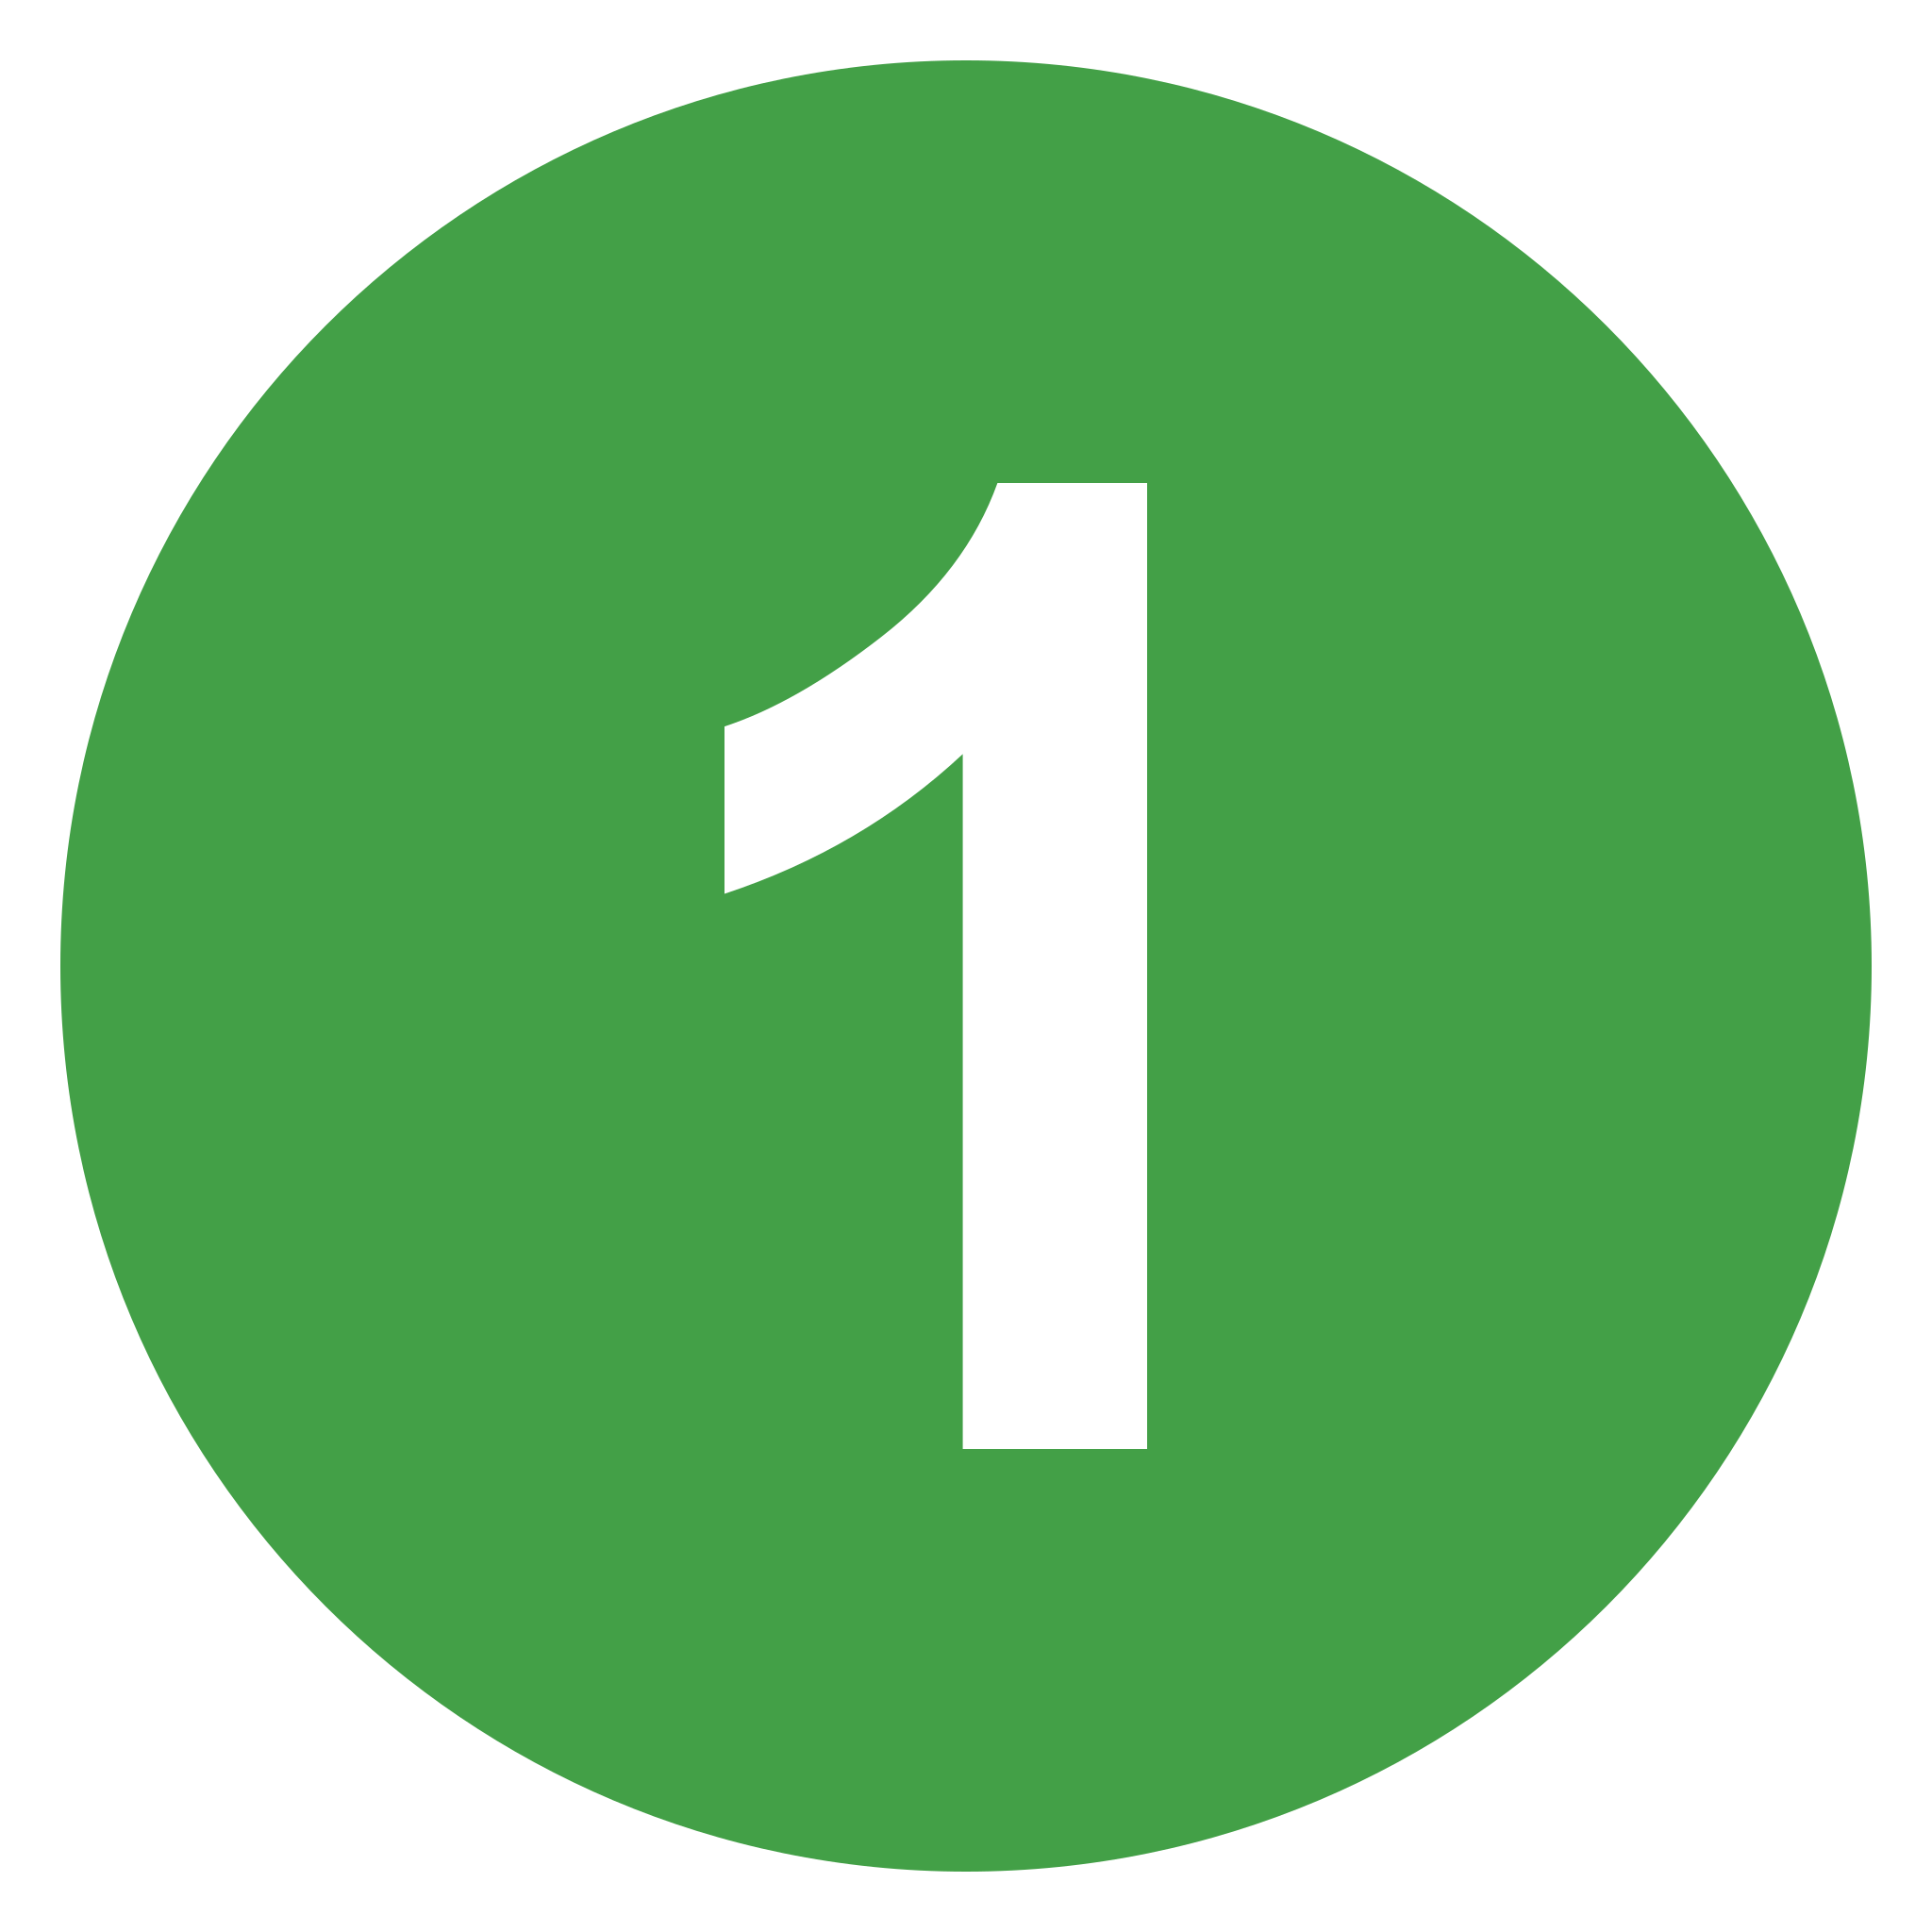 File:Eo circle green number-1.svg - Wikimedia Commons